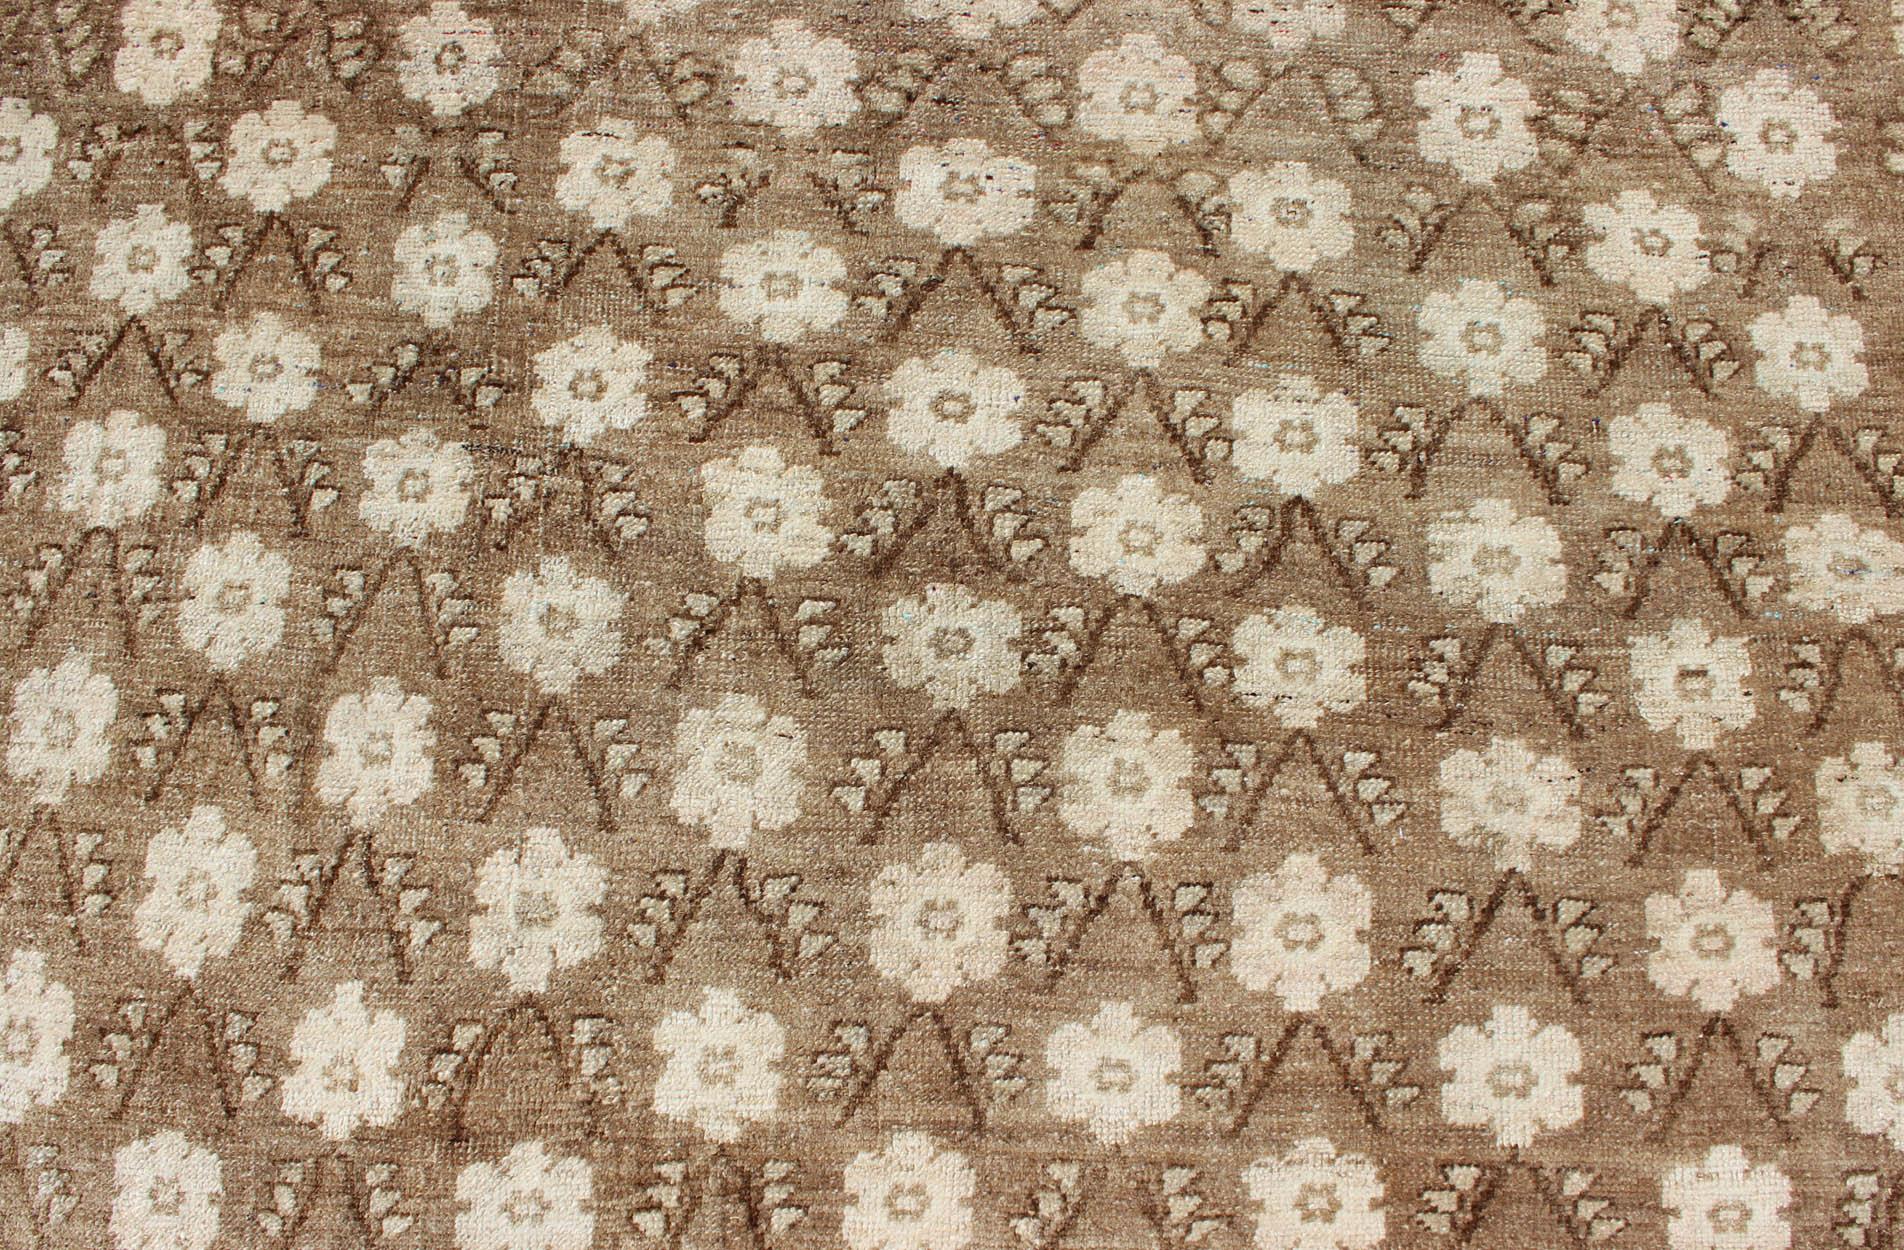 Striking 1940s Turkish Konya Rug with Flower Motifs in Brown and Cream For Sale 2